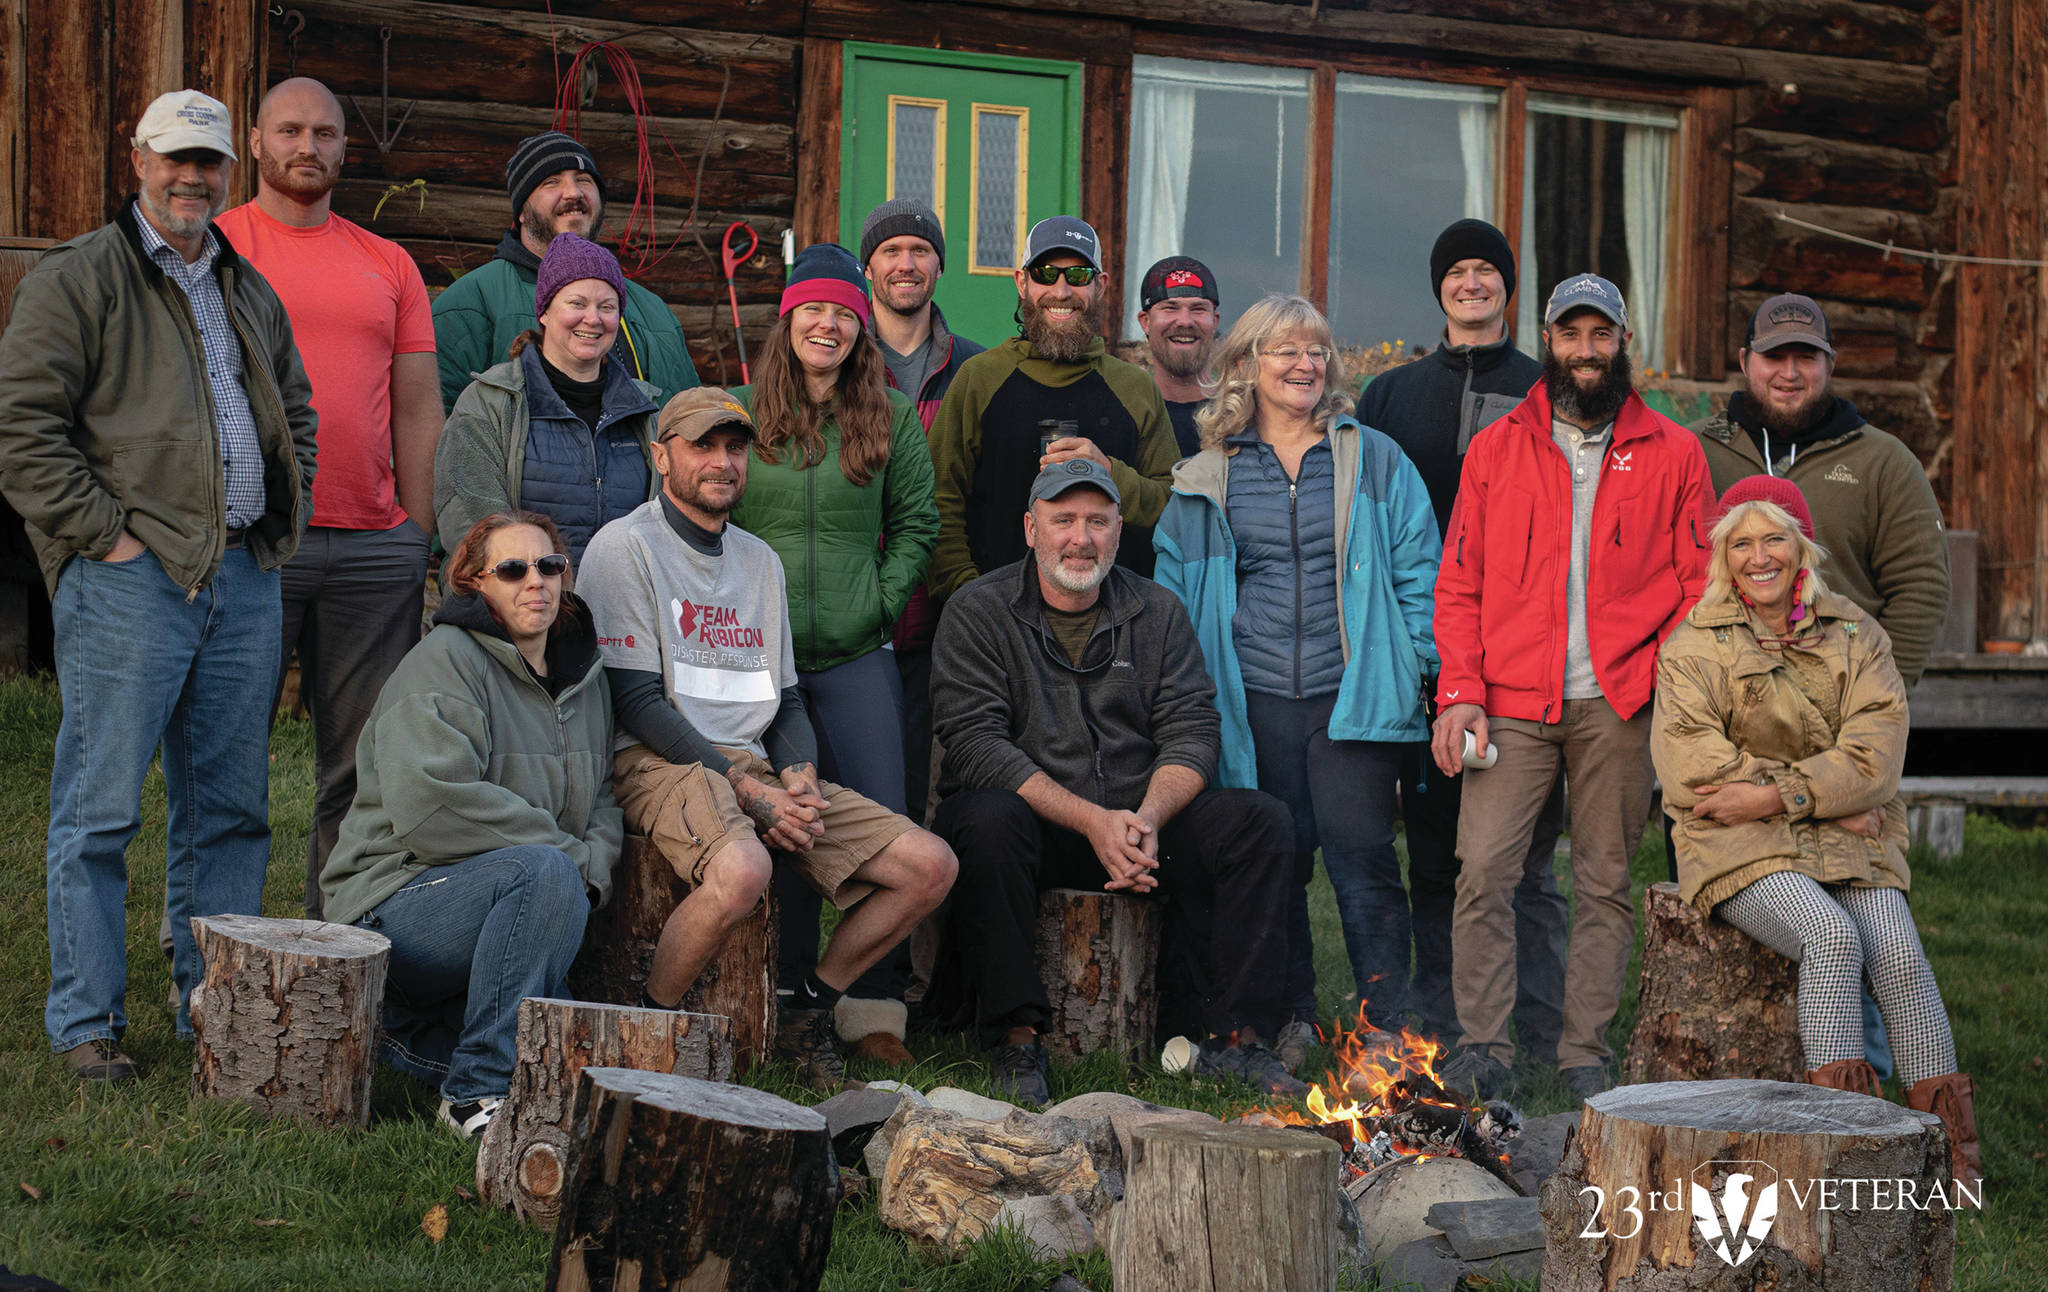 A group of veterans who participated in the 23rd Veteran trip to Homer, Alaska, pose at the Kilcher Family Homestead near Homer, Alaska, on the last day of the trip on Friday, Oct. 16, 2020. At far right, front, is Stellavera Kilcher, and third from right is Catkin Kilcher Burton, two of the Kilcher family members who participated in the visit. (Photo courtesy of 23rd Veteran)